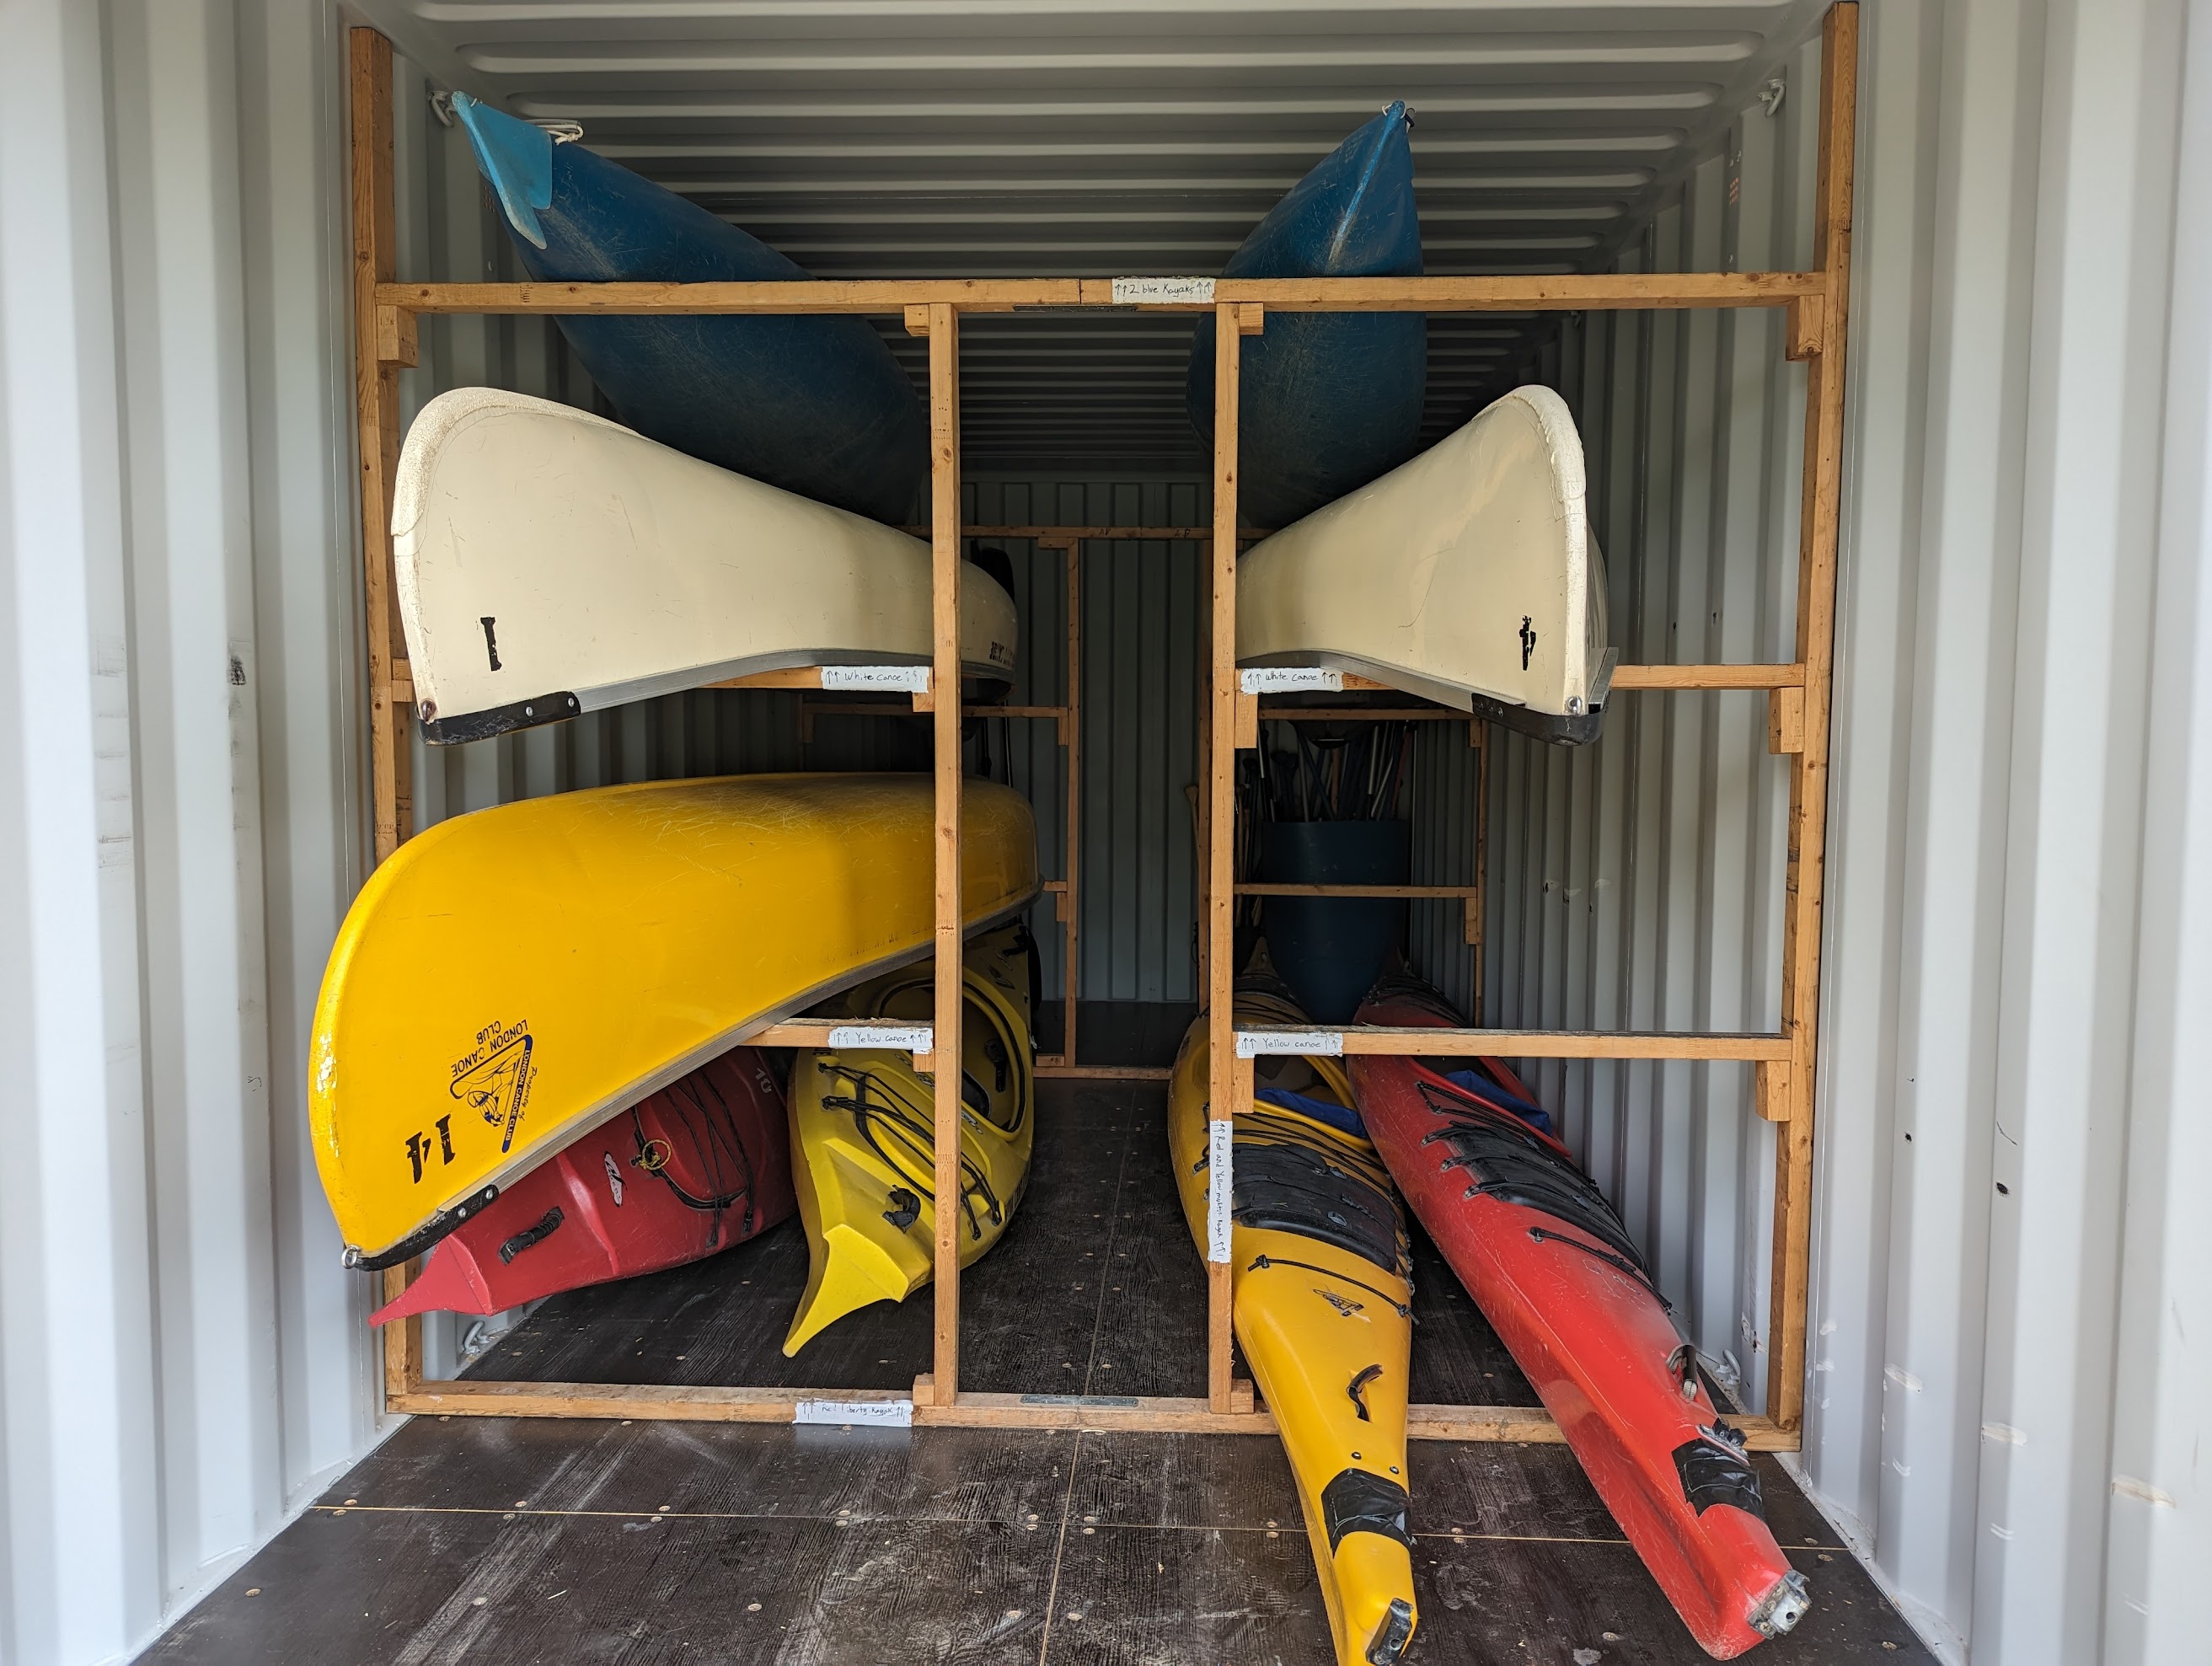 A variety of canoes and kayaks on racks